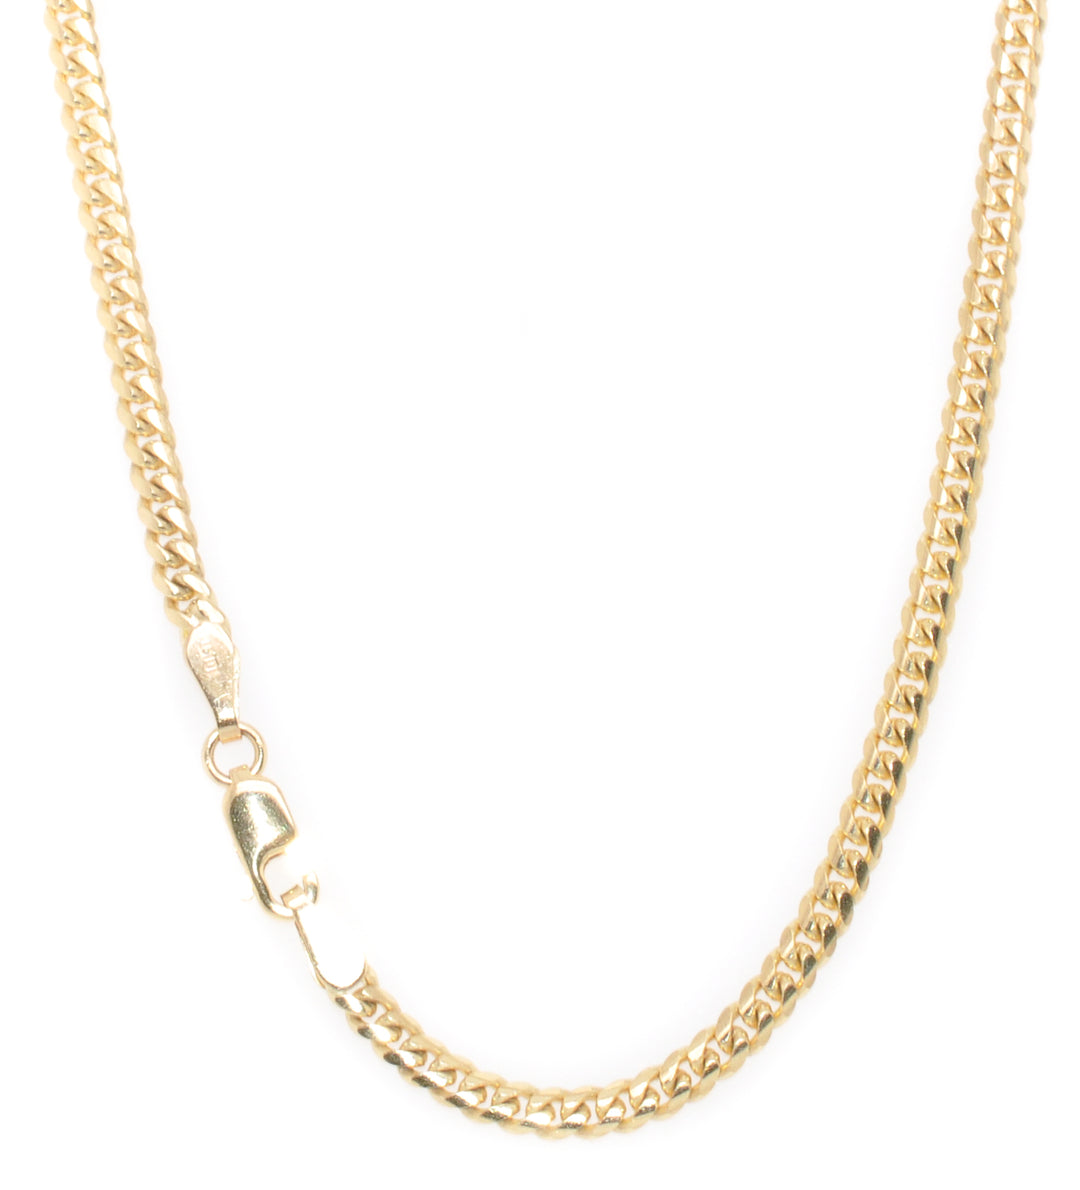 10KT Yellow Gold 26" 3MM Curb Link Chain.